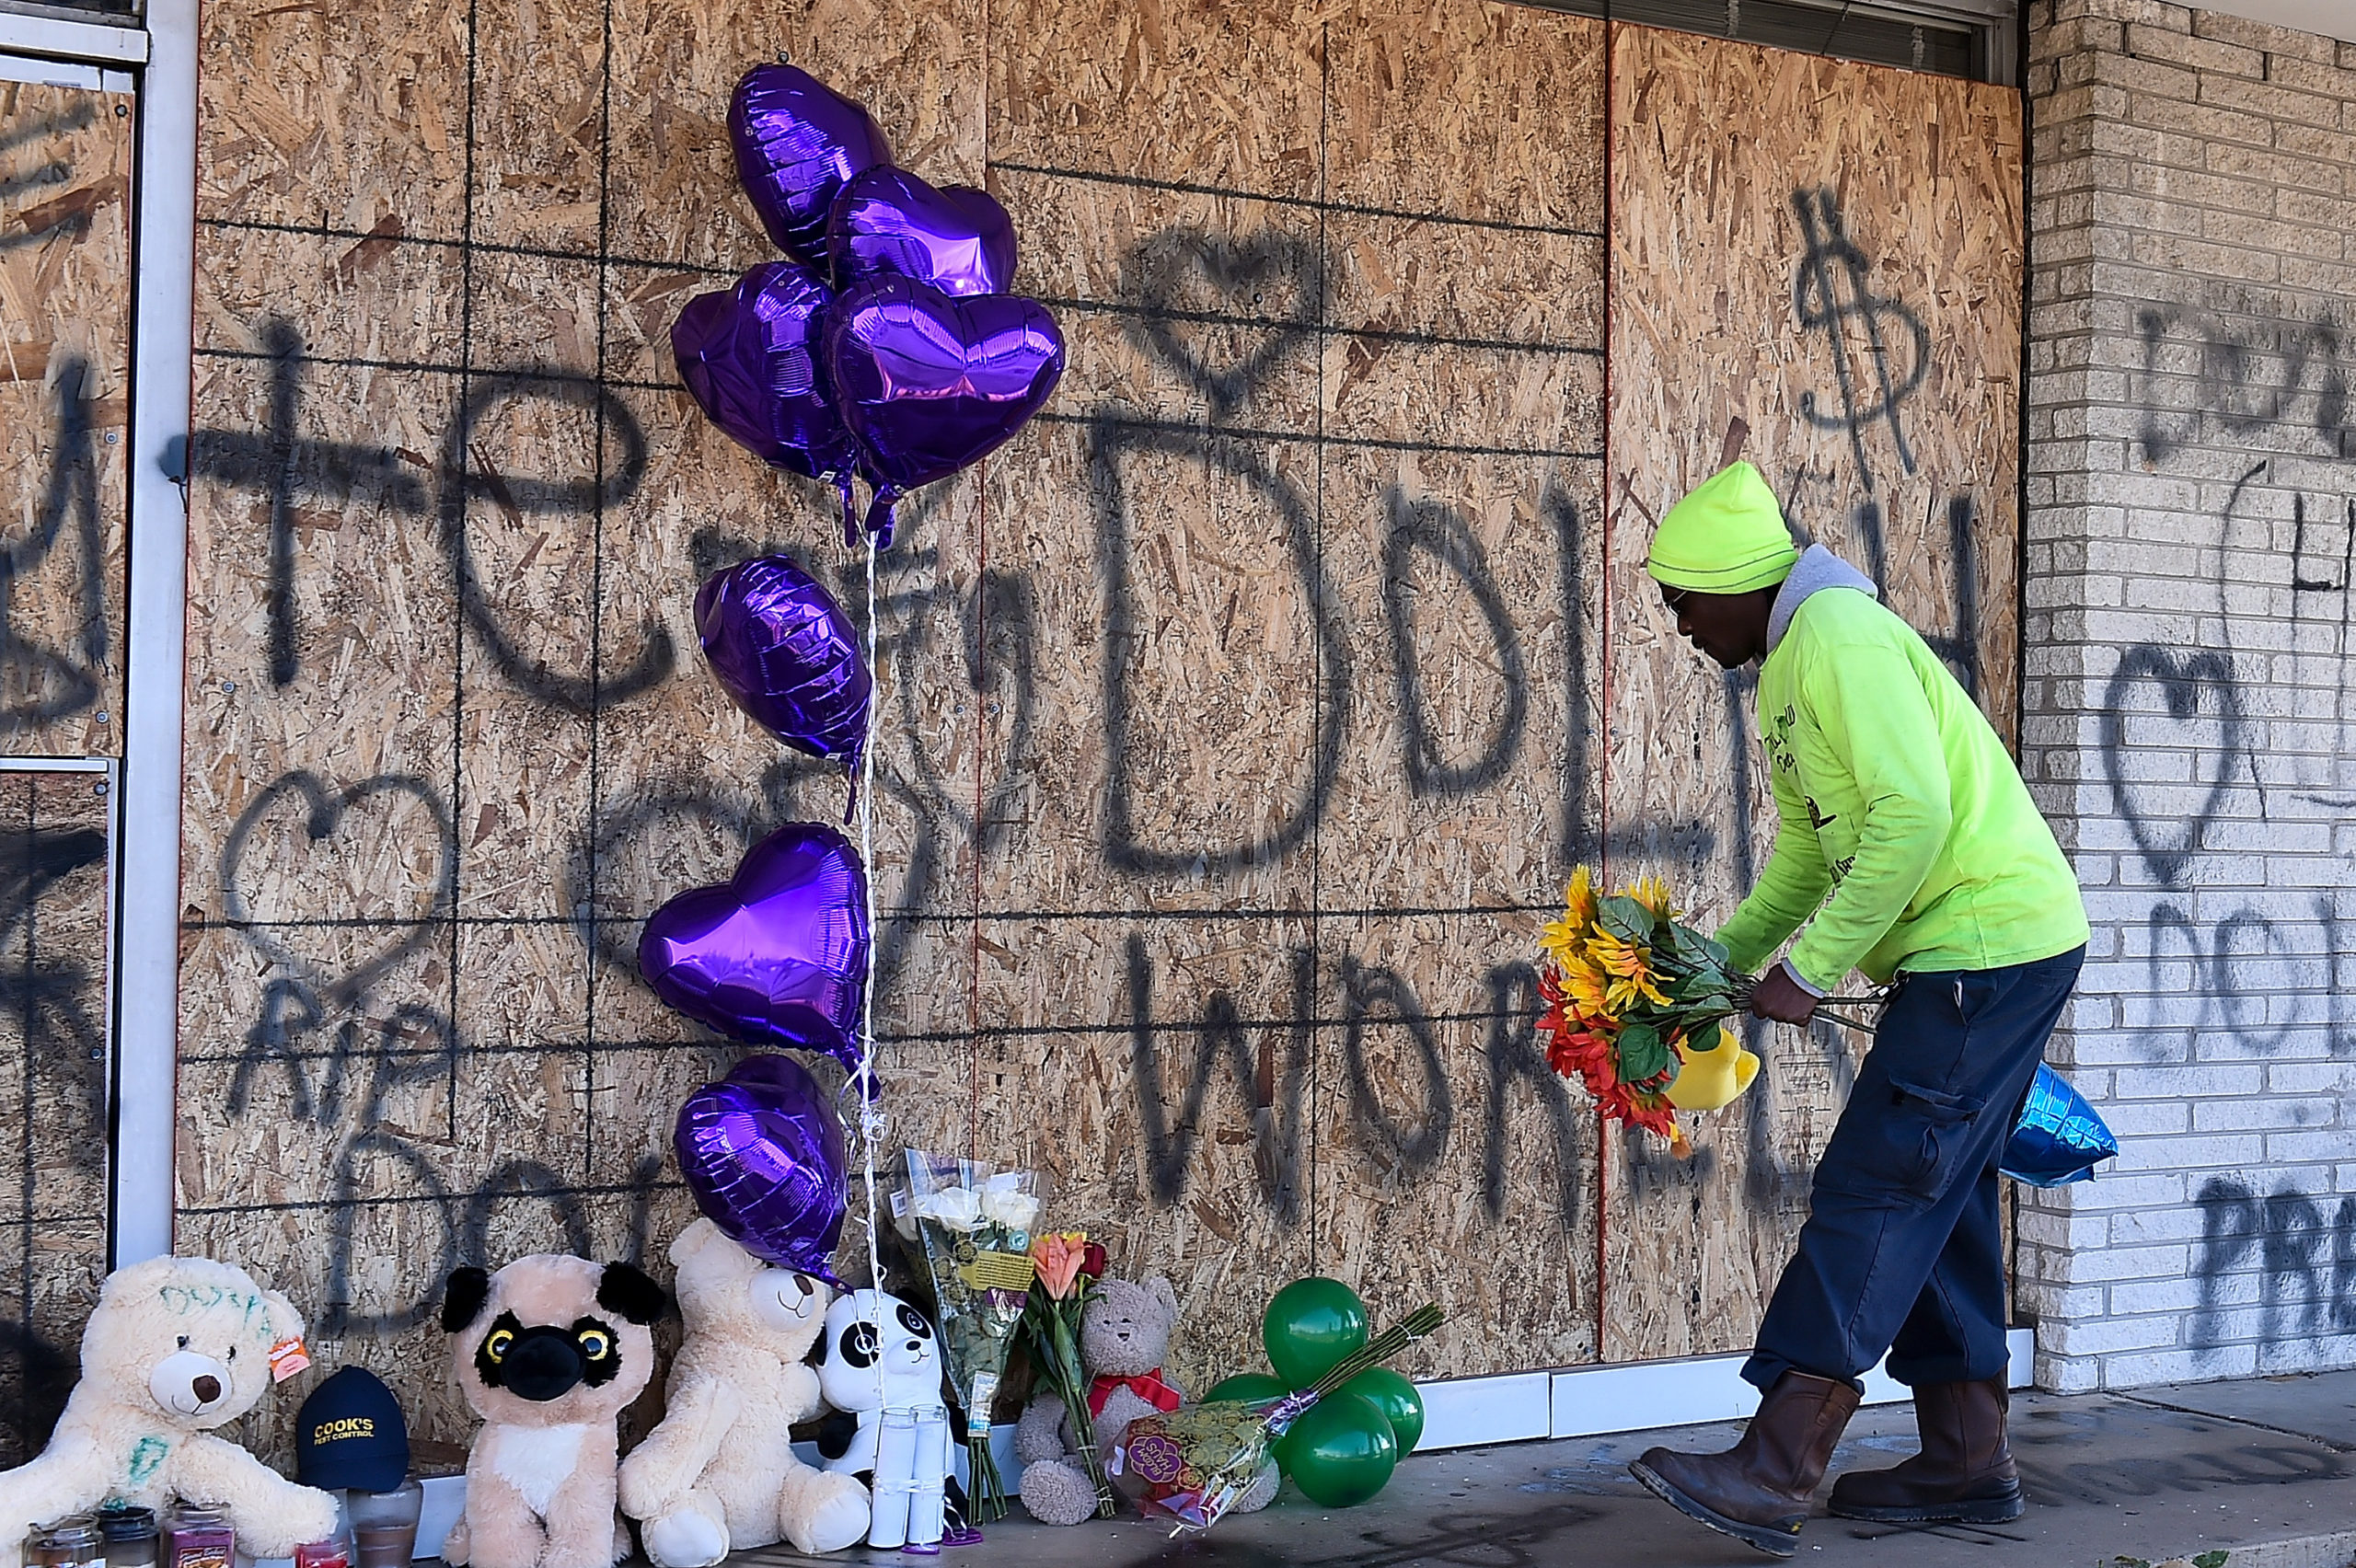 MEMPHIS, TENNESSEE - NOVEMBER 18: A man places flowers  at the memorial for Young Dolph outside of Makeda's Cookies bakery on November 18, 2021 in Memphis, Tennessee. Rapper Young Dolph, born as Adolph Thorton Jr., was killed at the age of 36 in a shooting at Makeda's Cookies bakery on November 17th in Memphis. (Photo by Justin Ford/Getty Images)